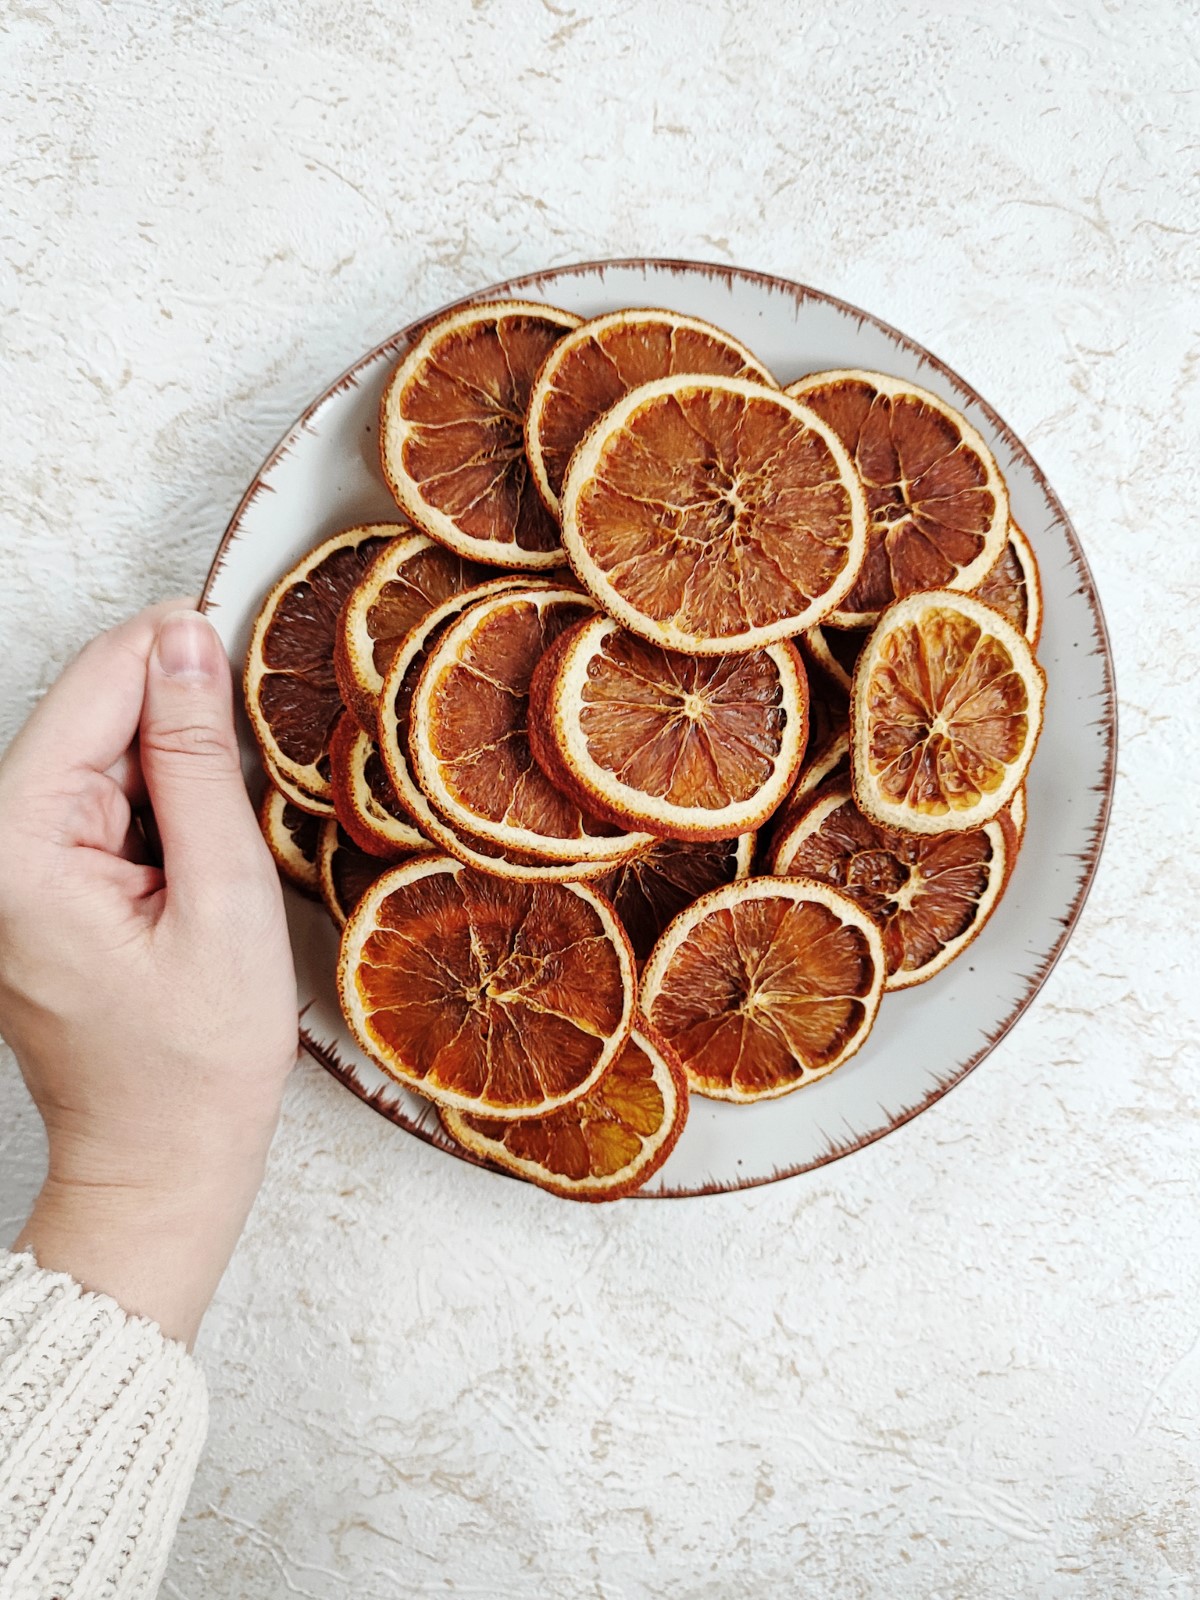 Dehydrated Oranges - dehydrated citrus